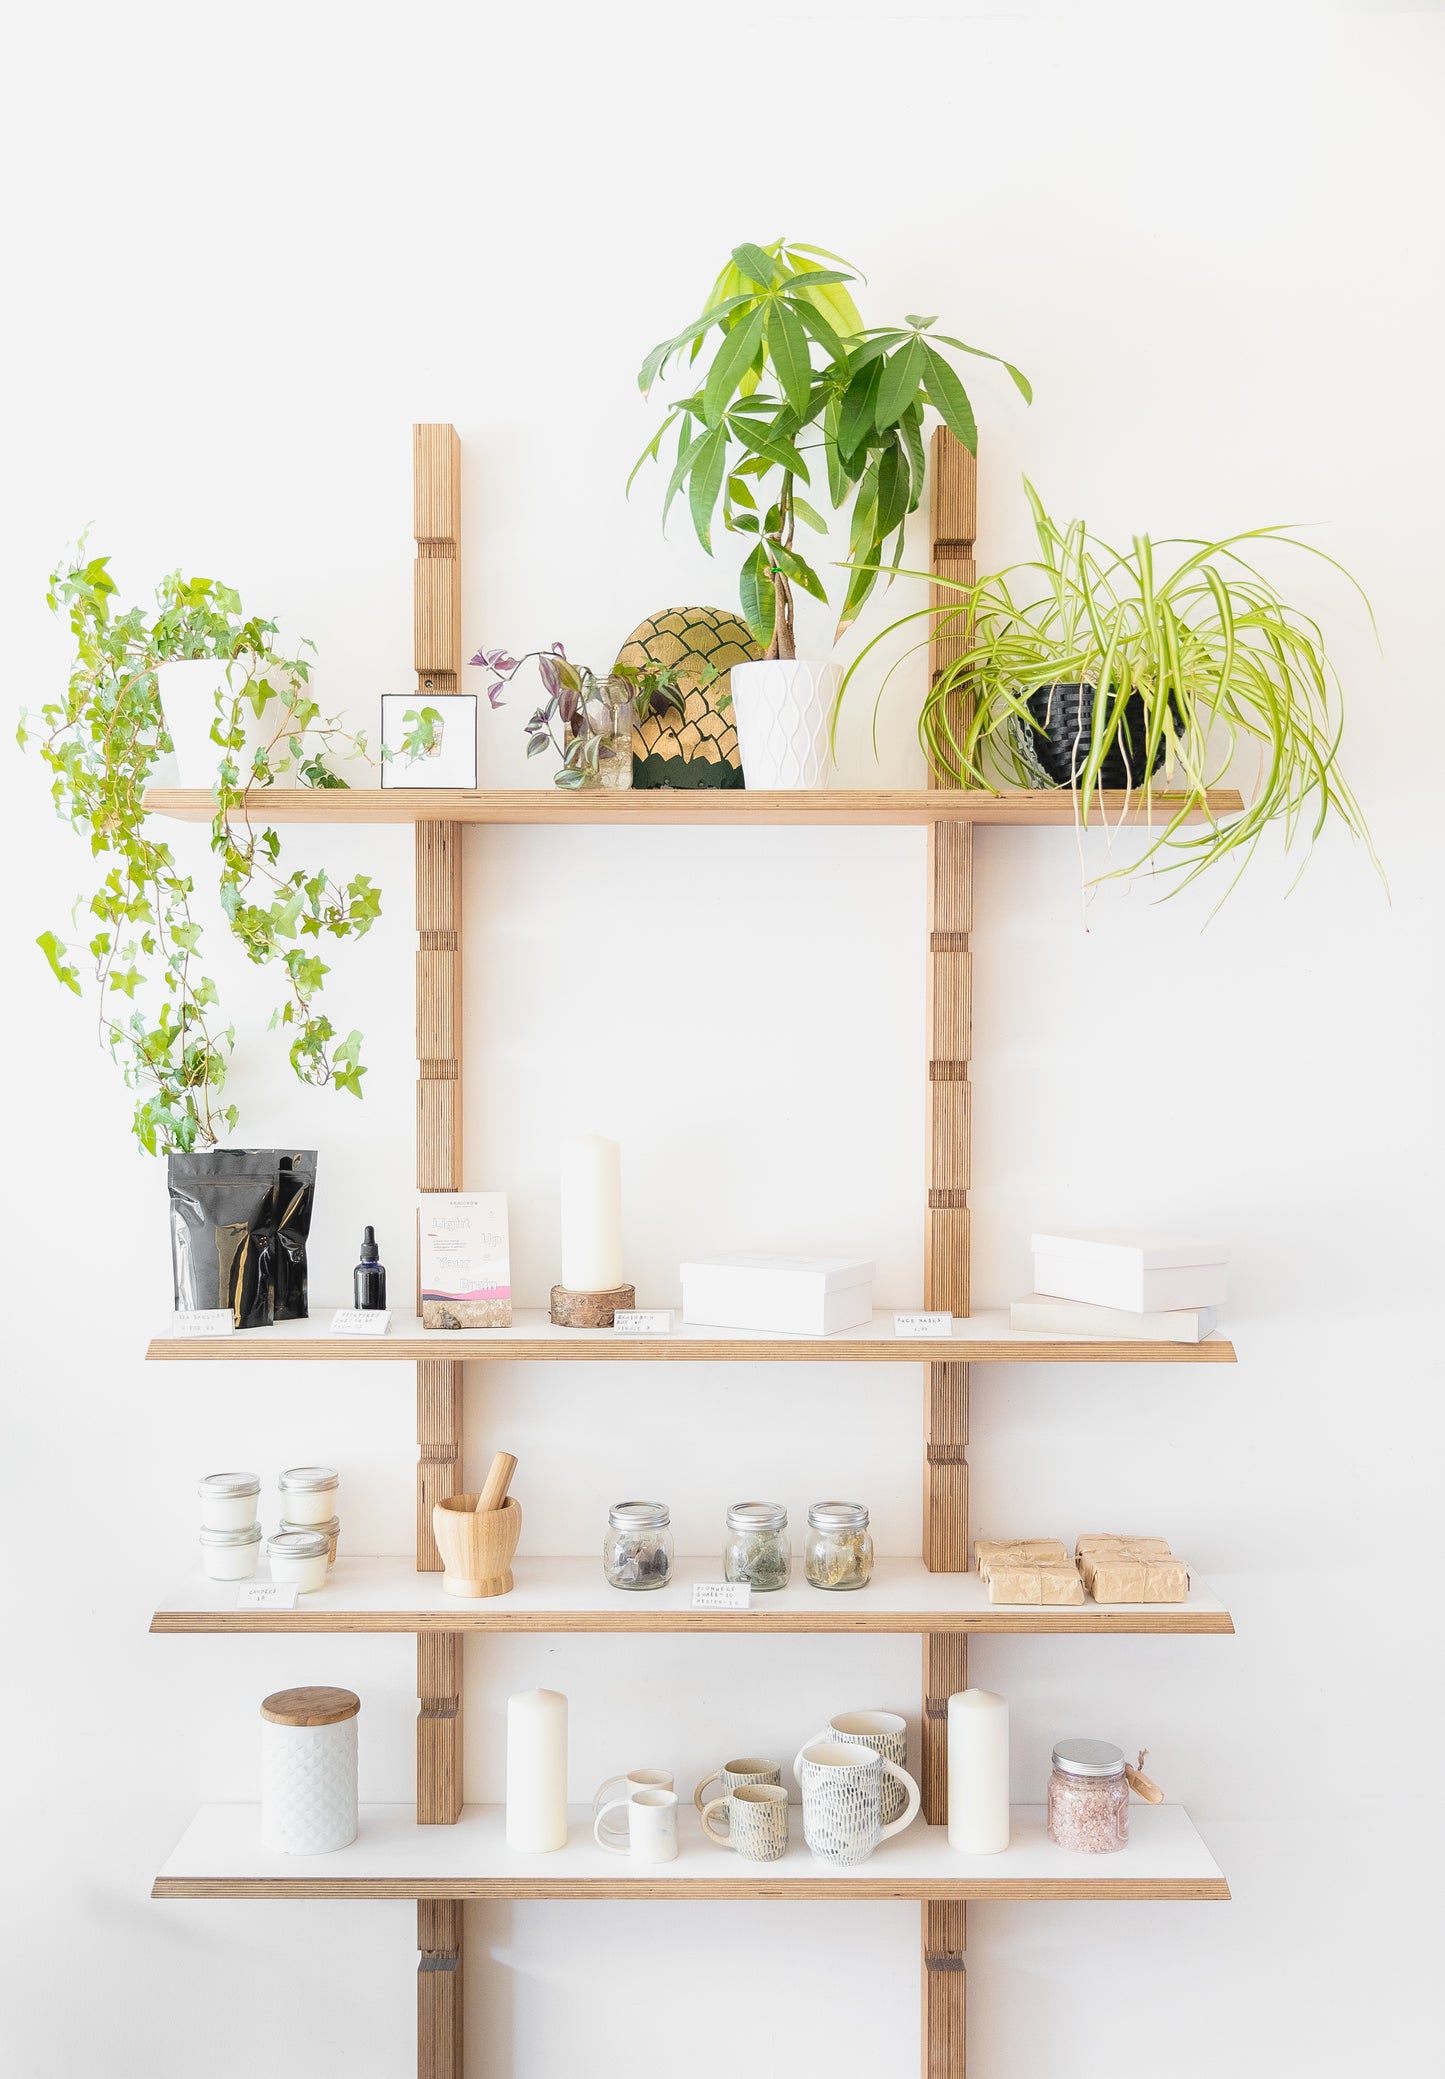 a-selection-of-candles-and-plants-on-wooden-shelves - The Little Market Bunch